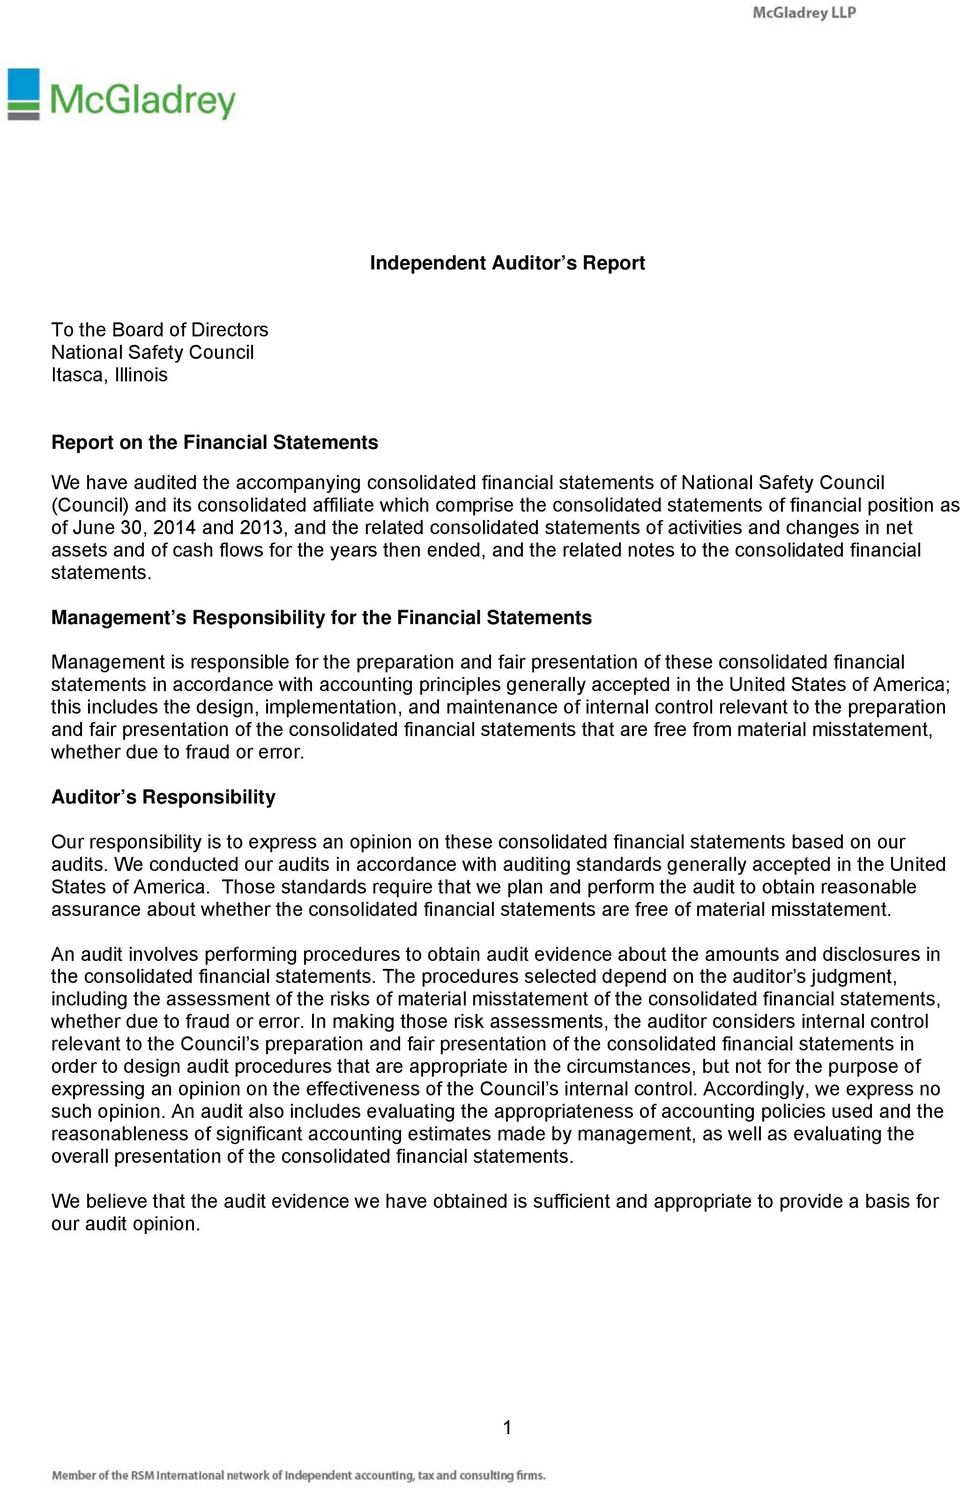 statements of National Safety Council (Council) and its consolidated affiliate which comprise the consolidated statements of financial position as of June 30, 2014 and 2013, and the related